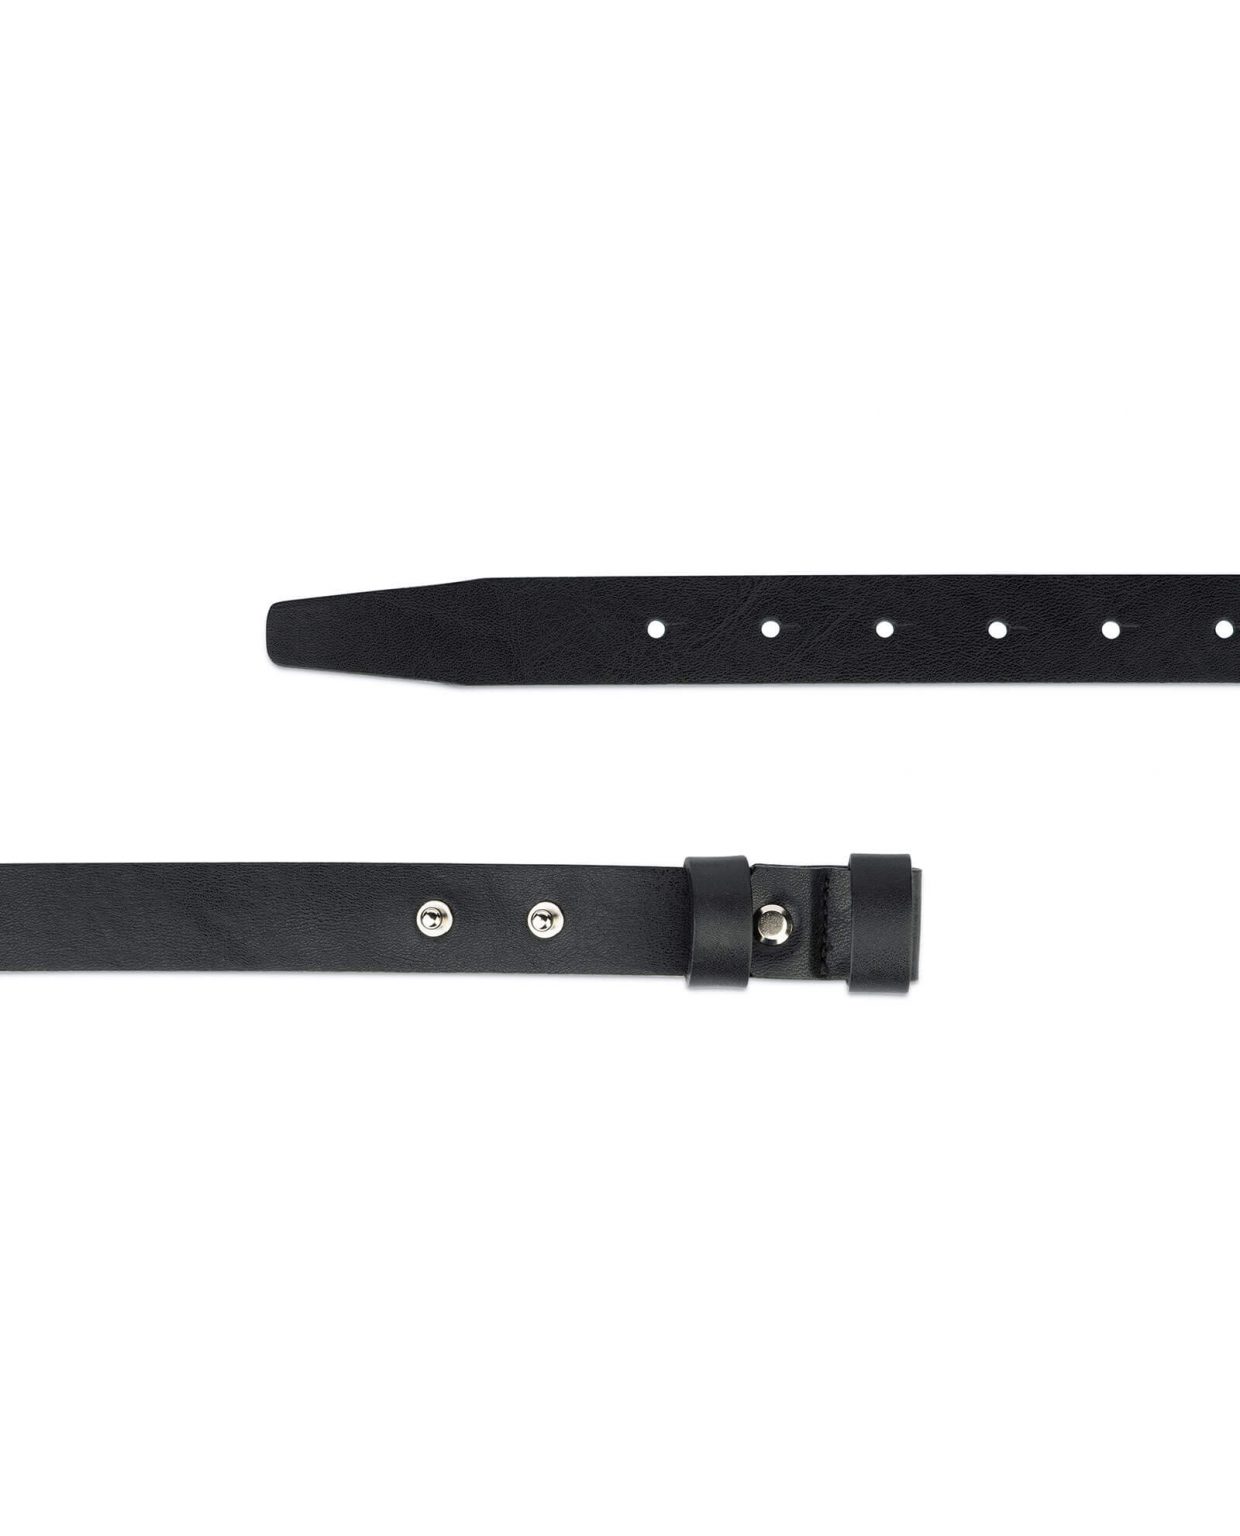 Buy 1 Inch Womens Black Leather Belt Without Buckle | Capo Pelle